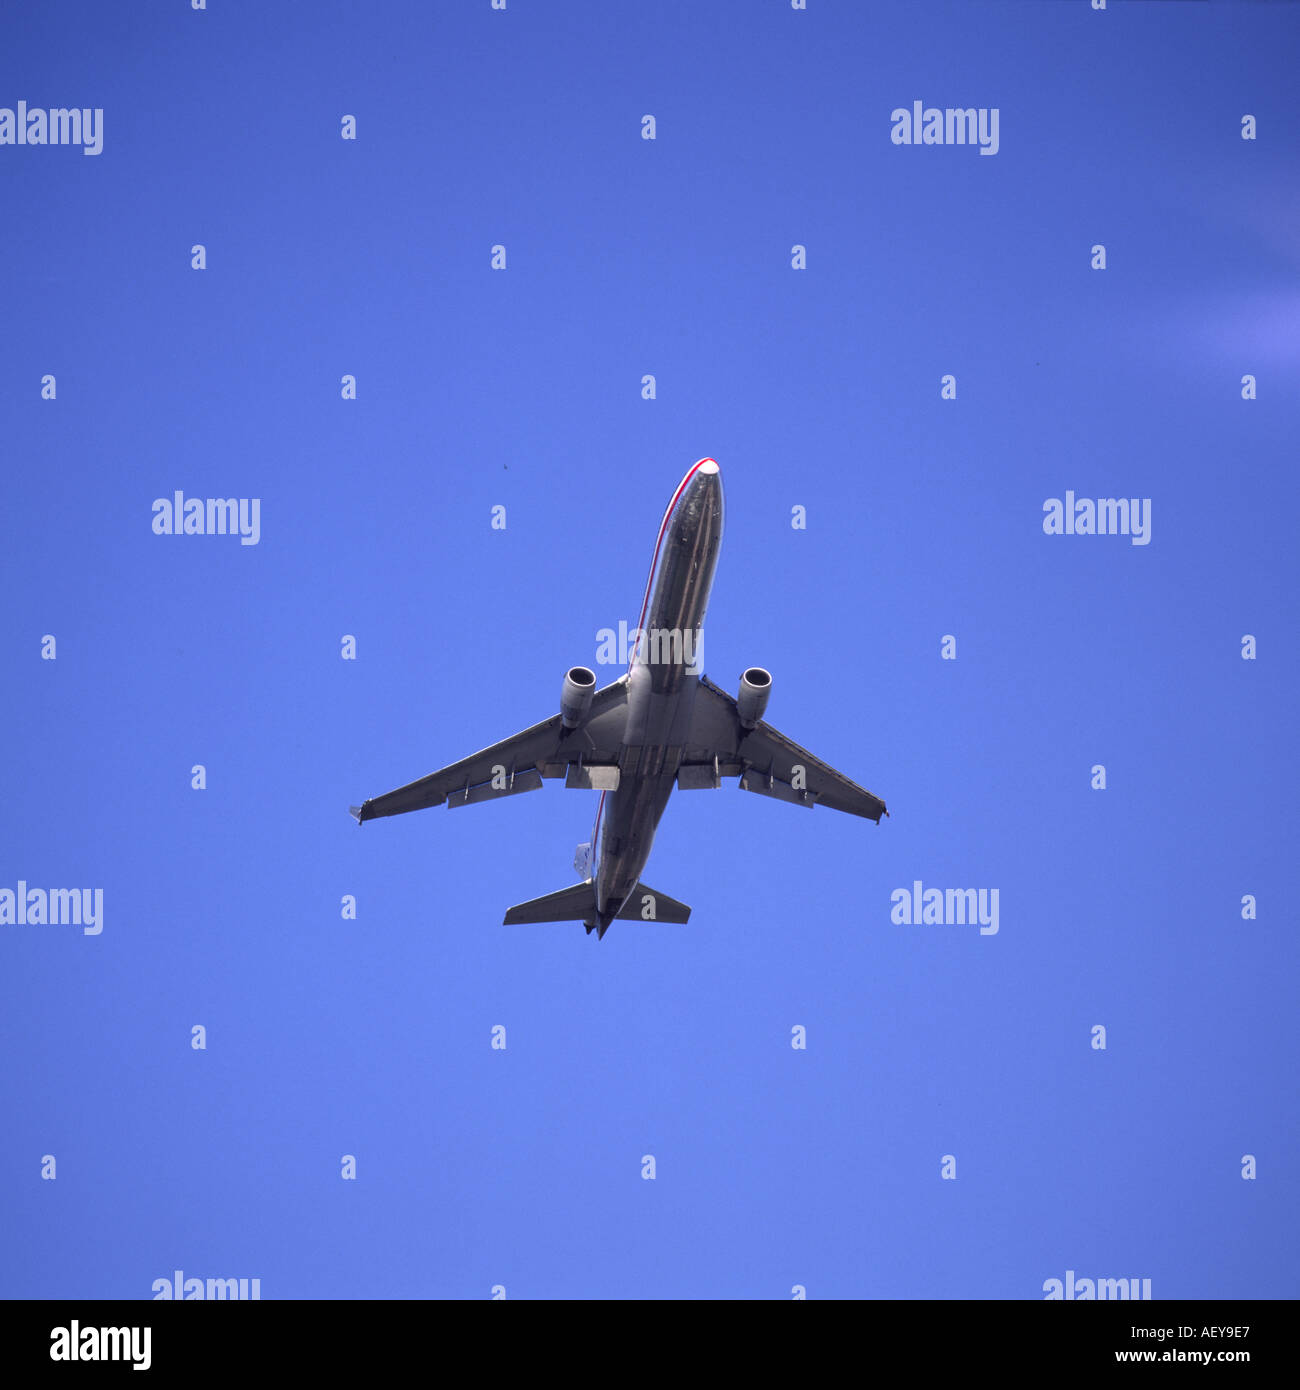 American Airlines aircraft in flight from below with flaps down Stock Photo